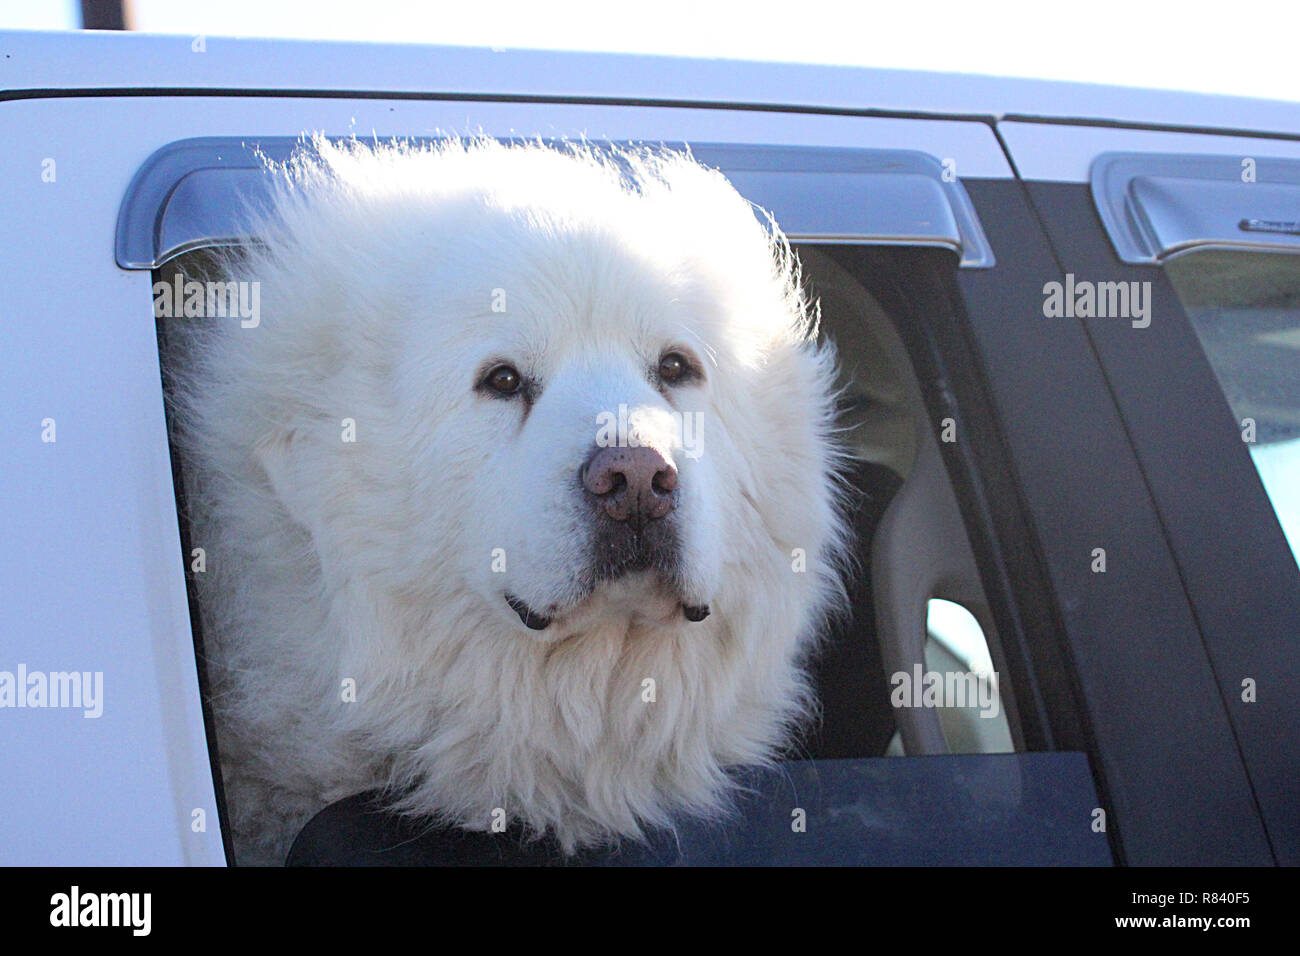 Great White Pyrenees looking out the car window Stock Photo